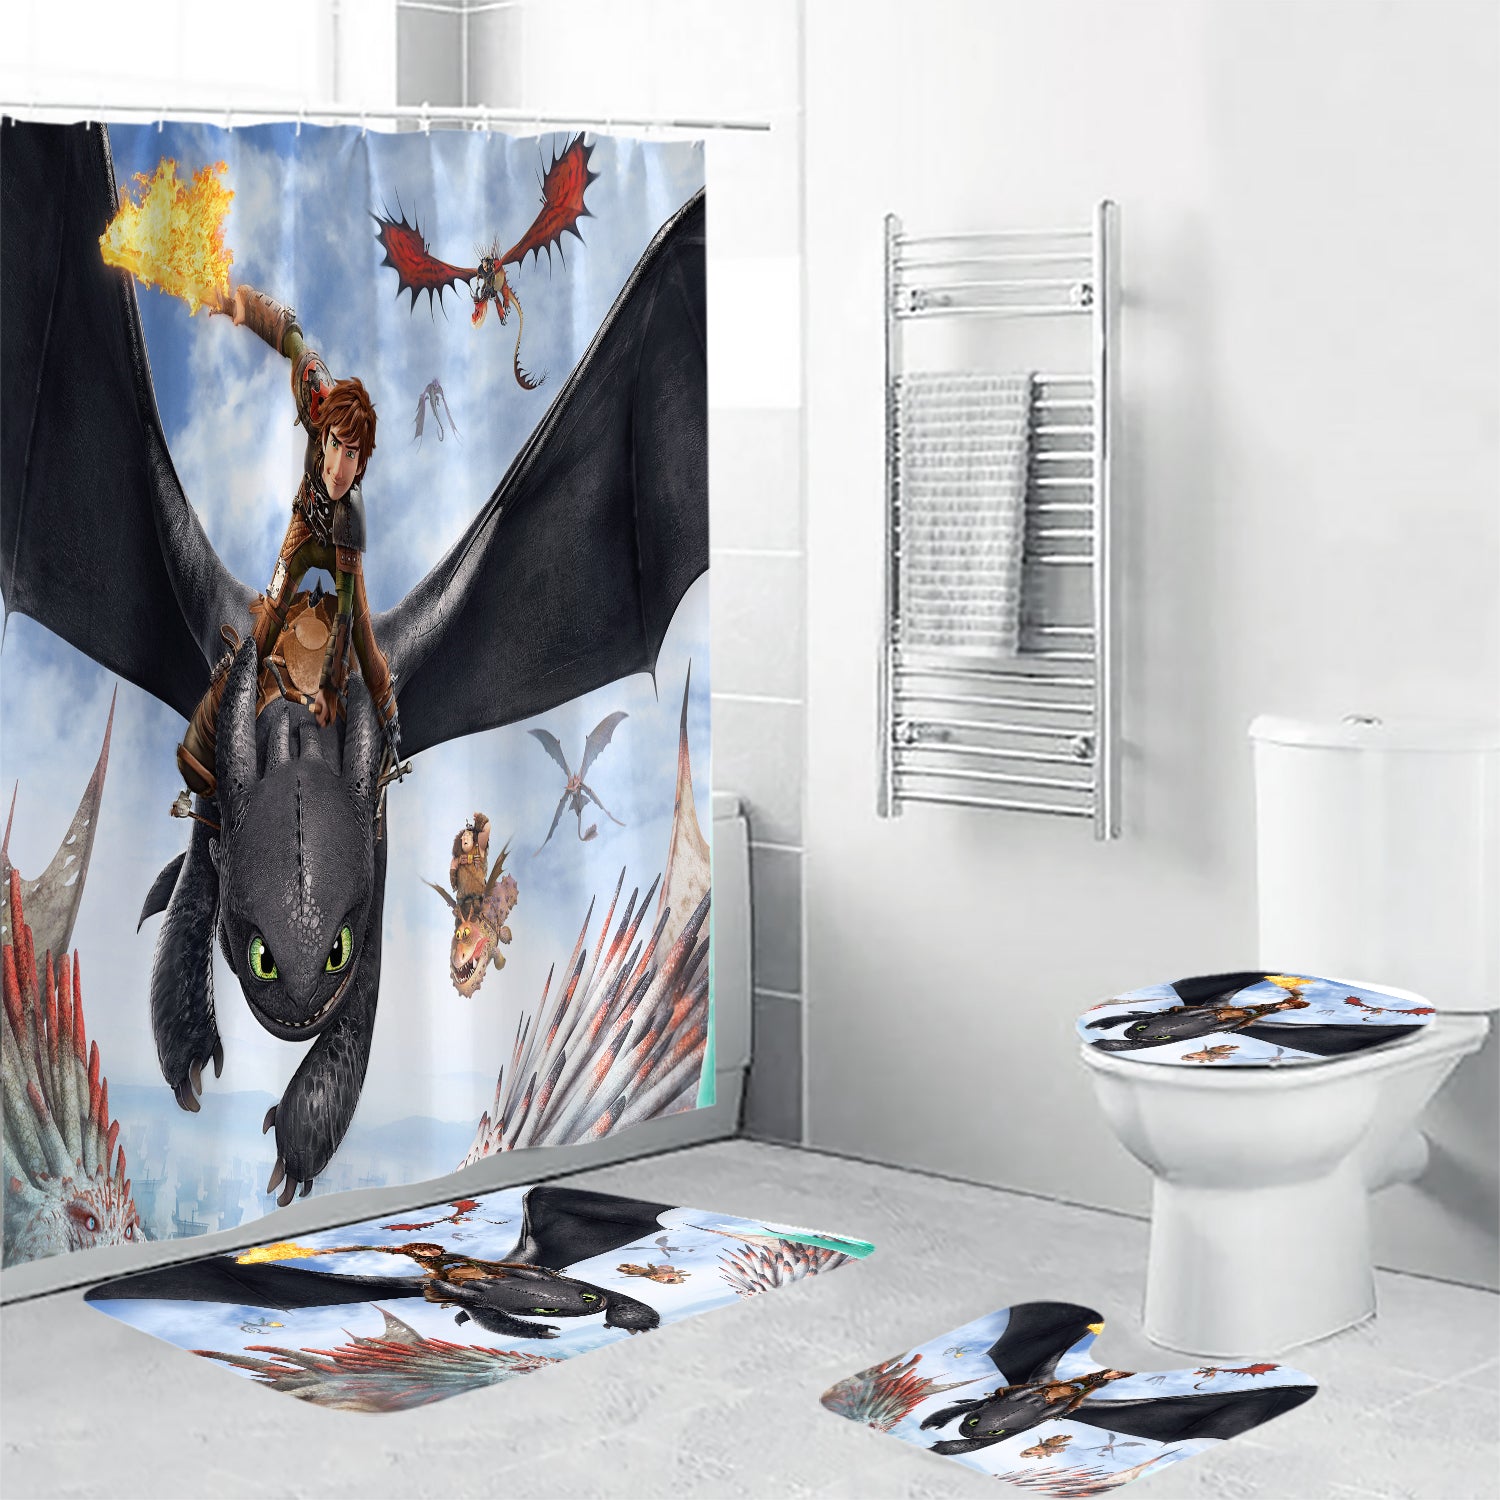 How to Train Your Dragon Poster 8 Waterproof Shower Curtain Non-Slip Toilet Lid Cover Bath Mat - Bathroom Set